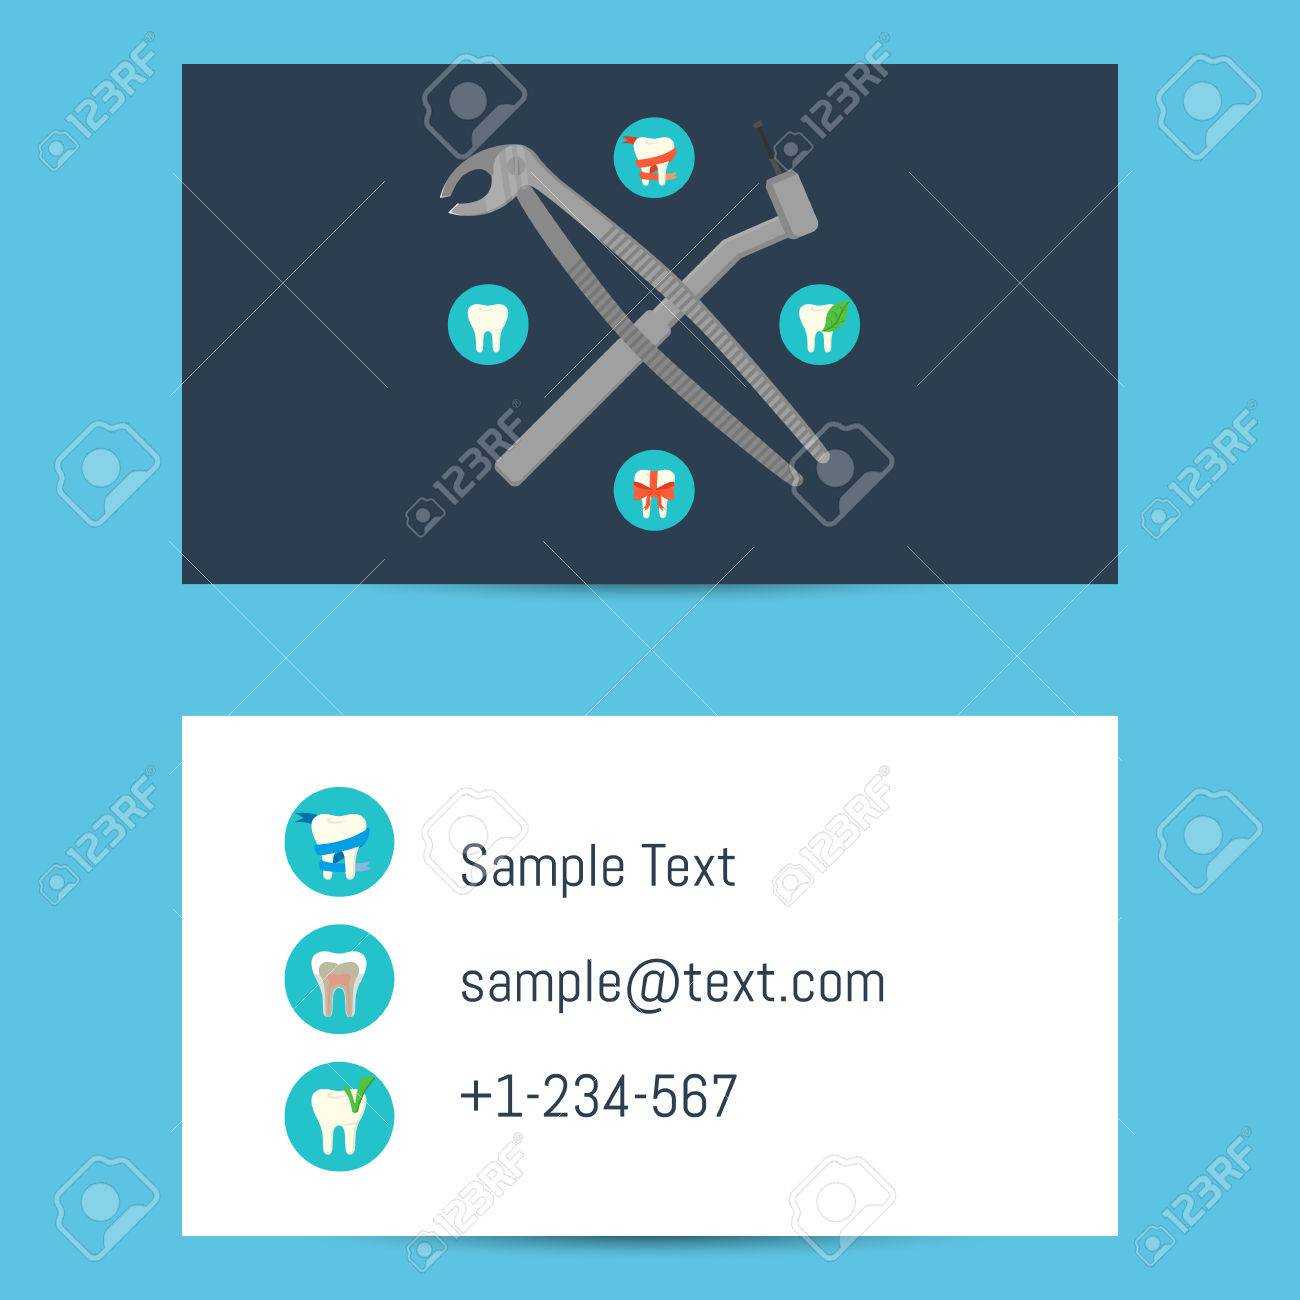 036 Office Business Card Template Ideas Phenomenal Open 8371 Pertaining To Office Max Business Card Template